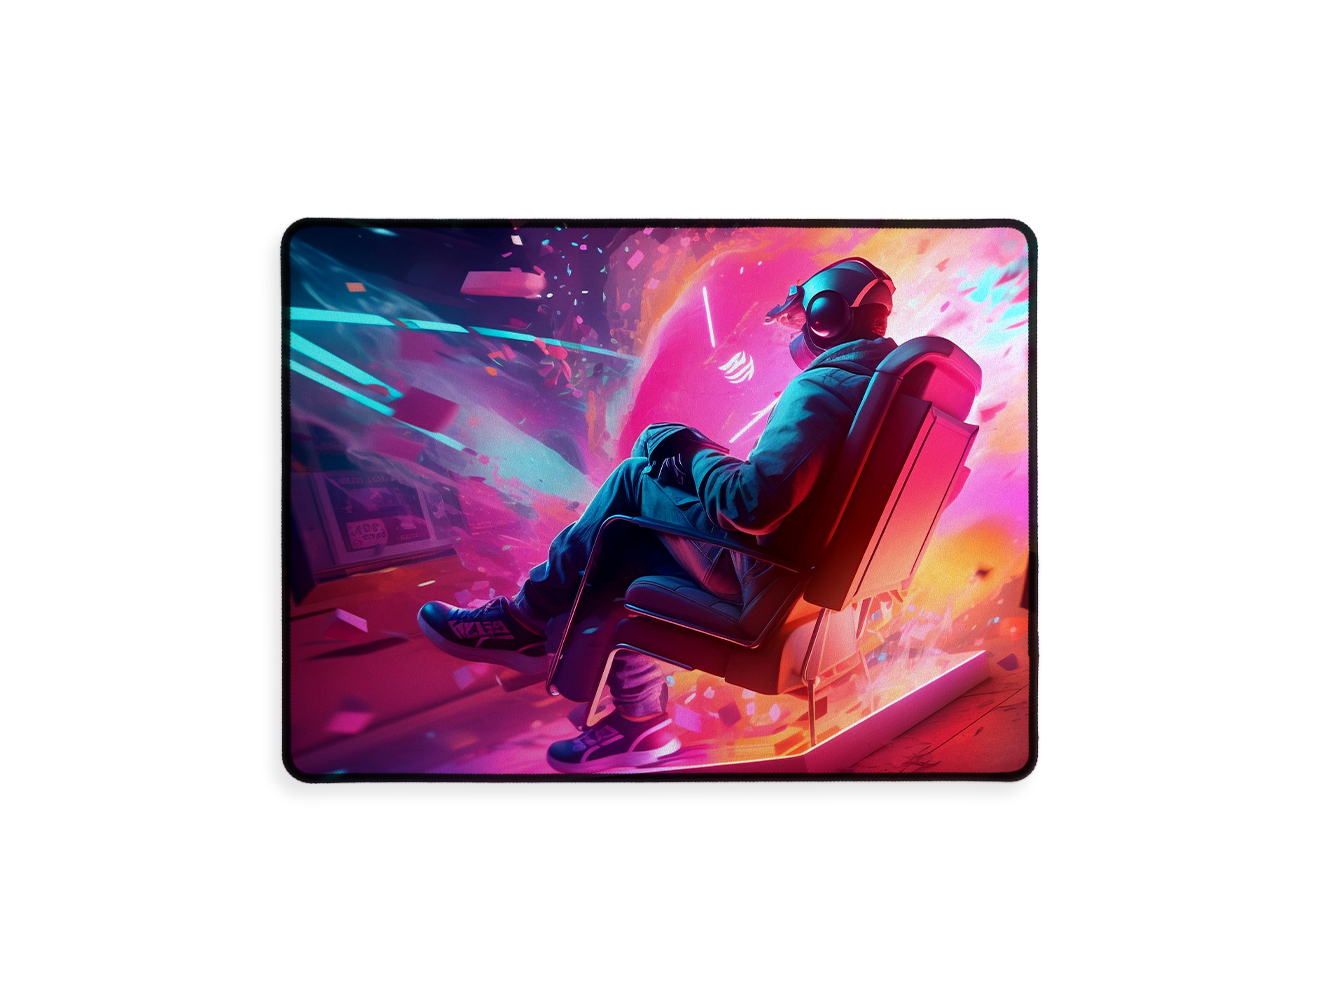 Sublimation Gaming Mouse Pad 400 x 300 x 3 mm - White Men In Chair